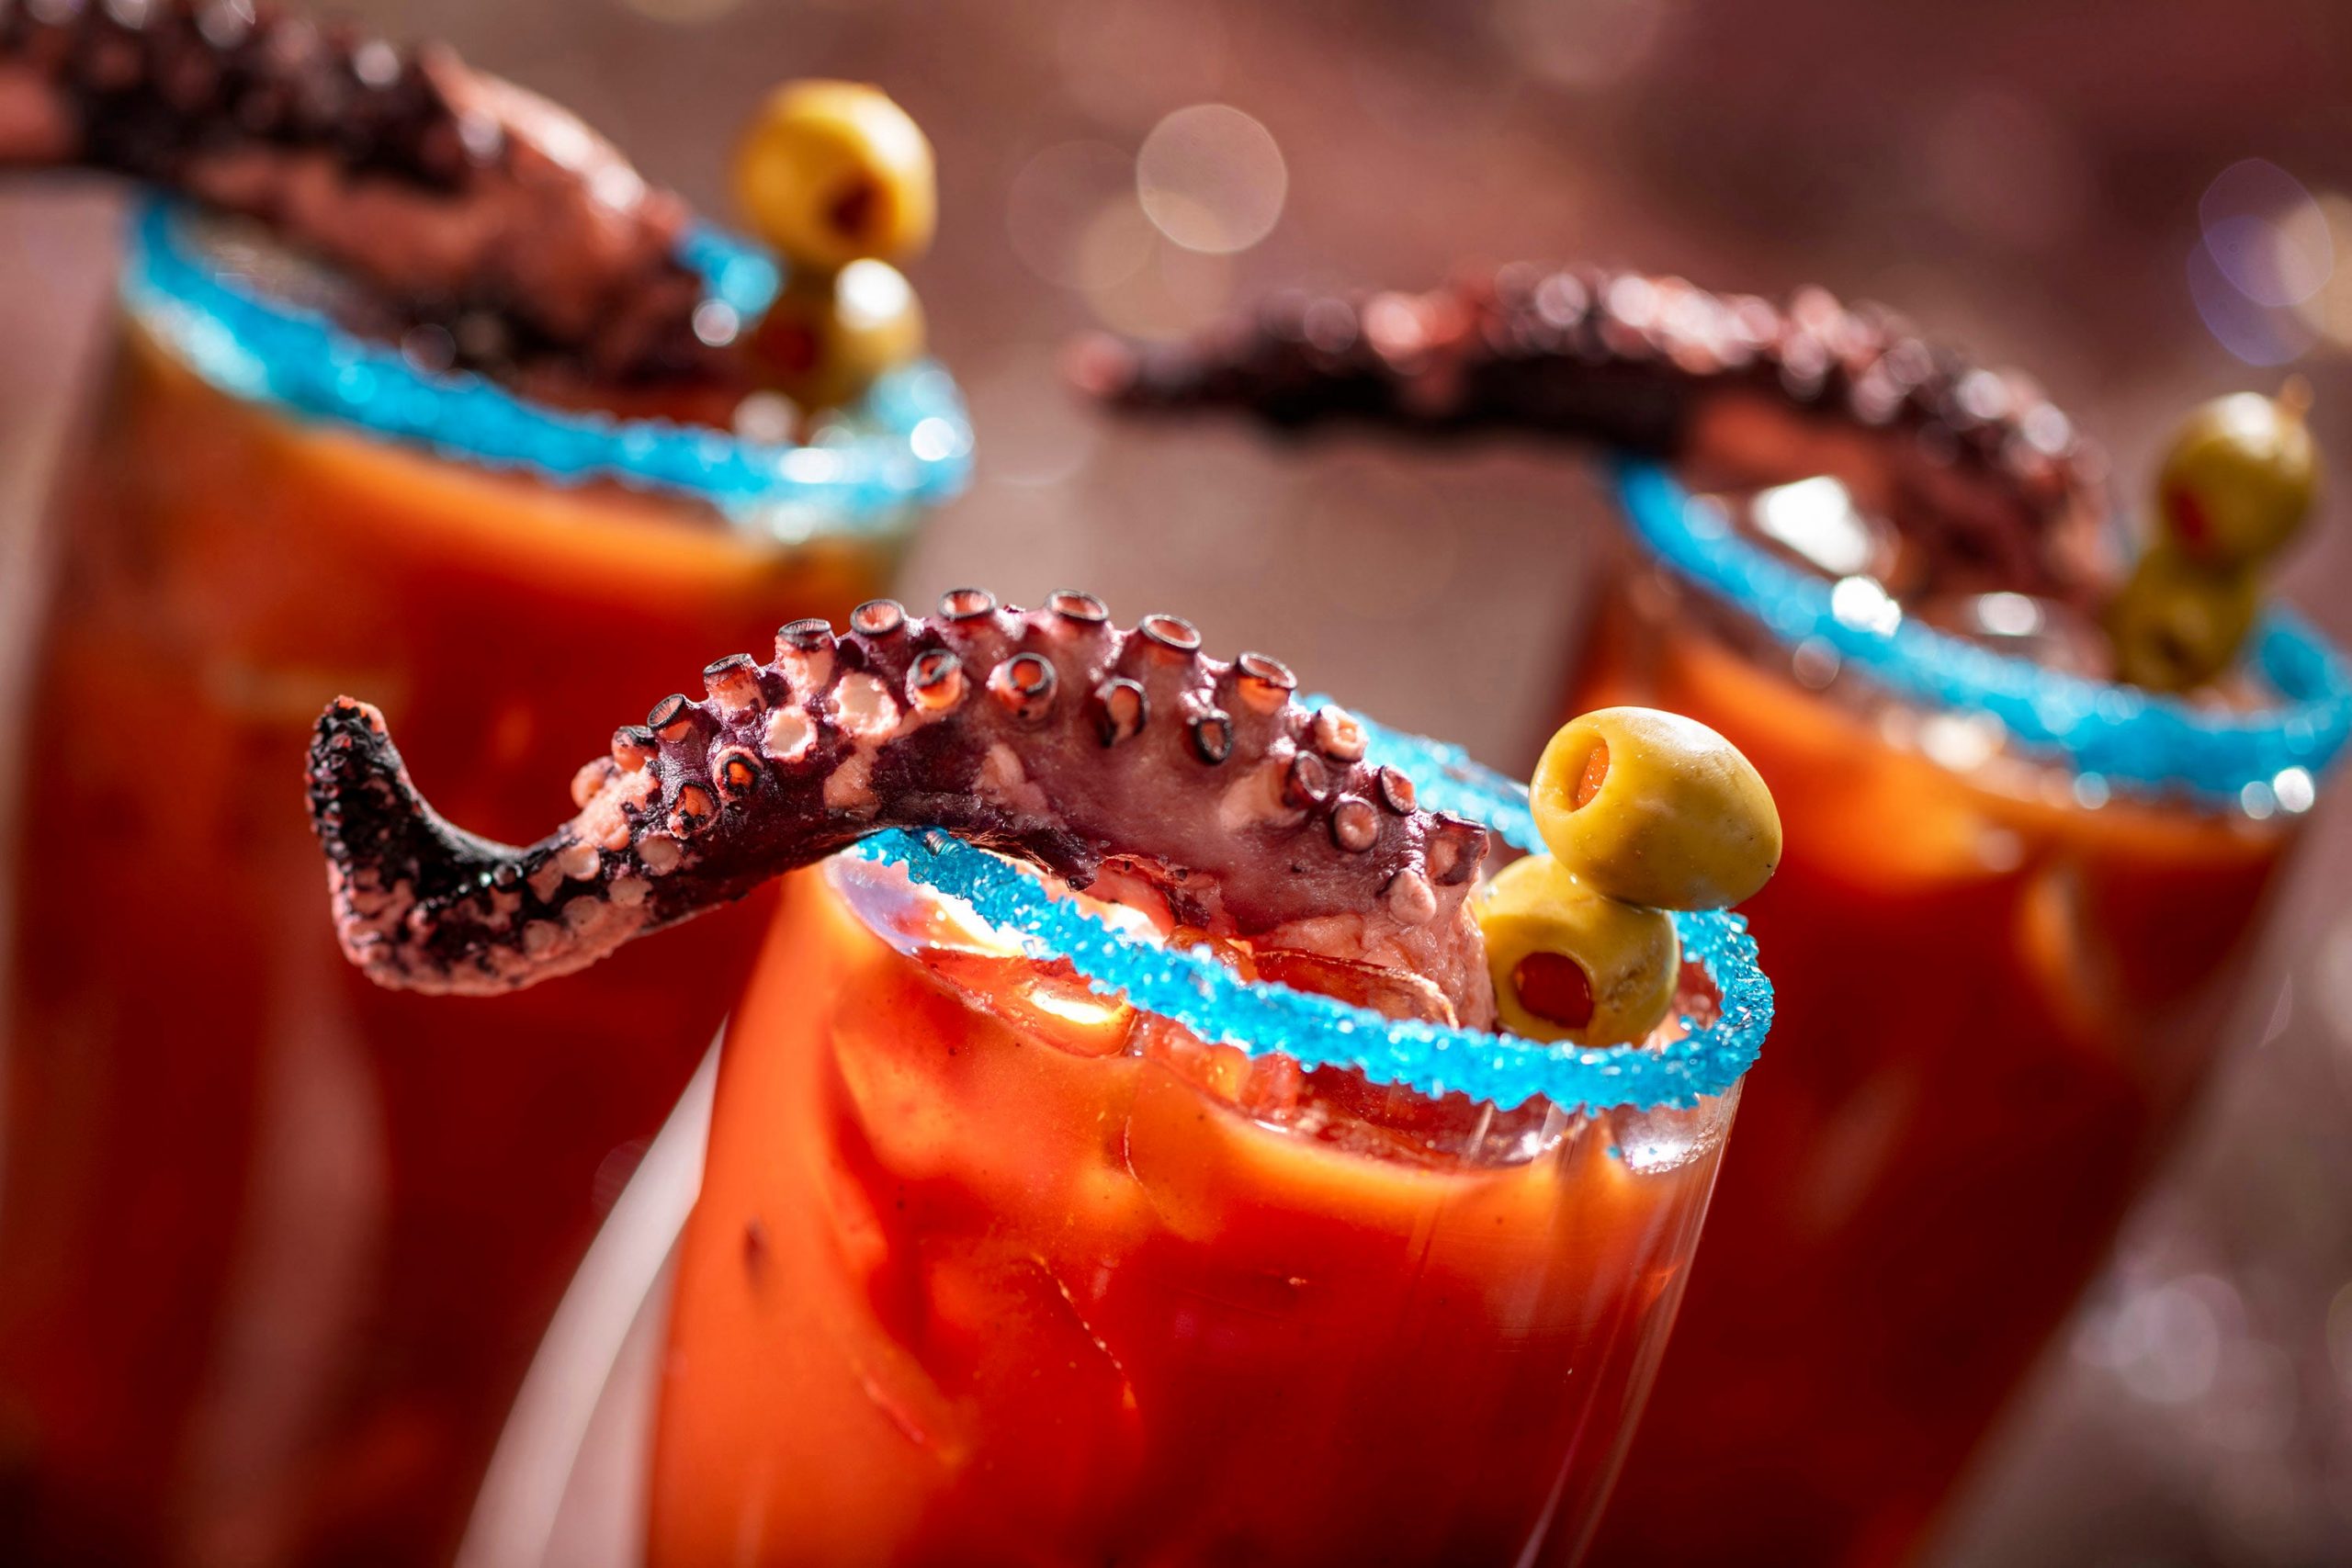 One of Disney's culinary creations, which is red drink with blue coating around the rim of the glass, with tentacles sticking out of the top.